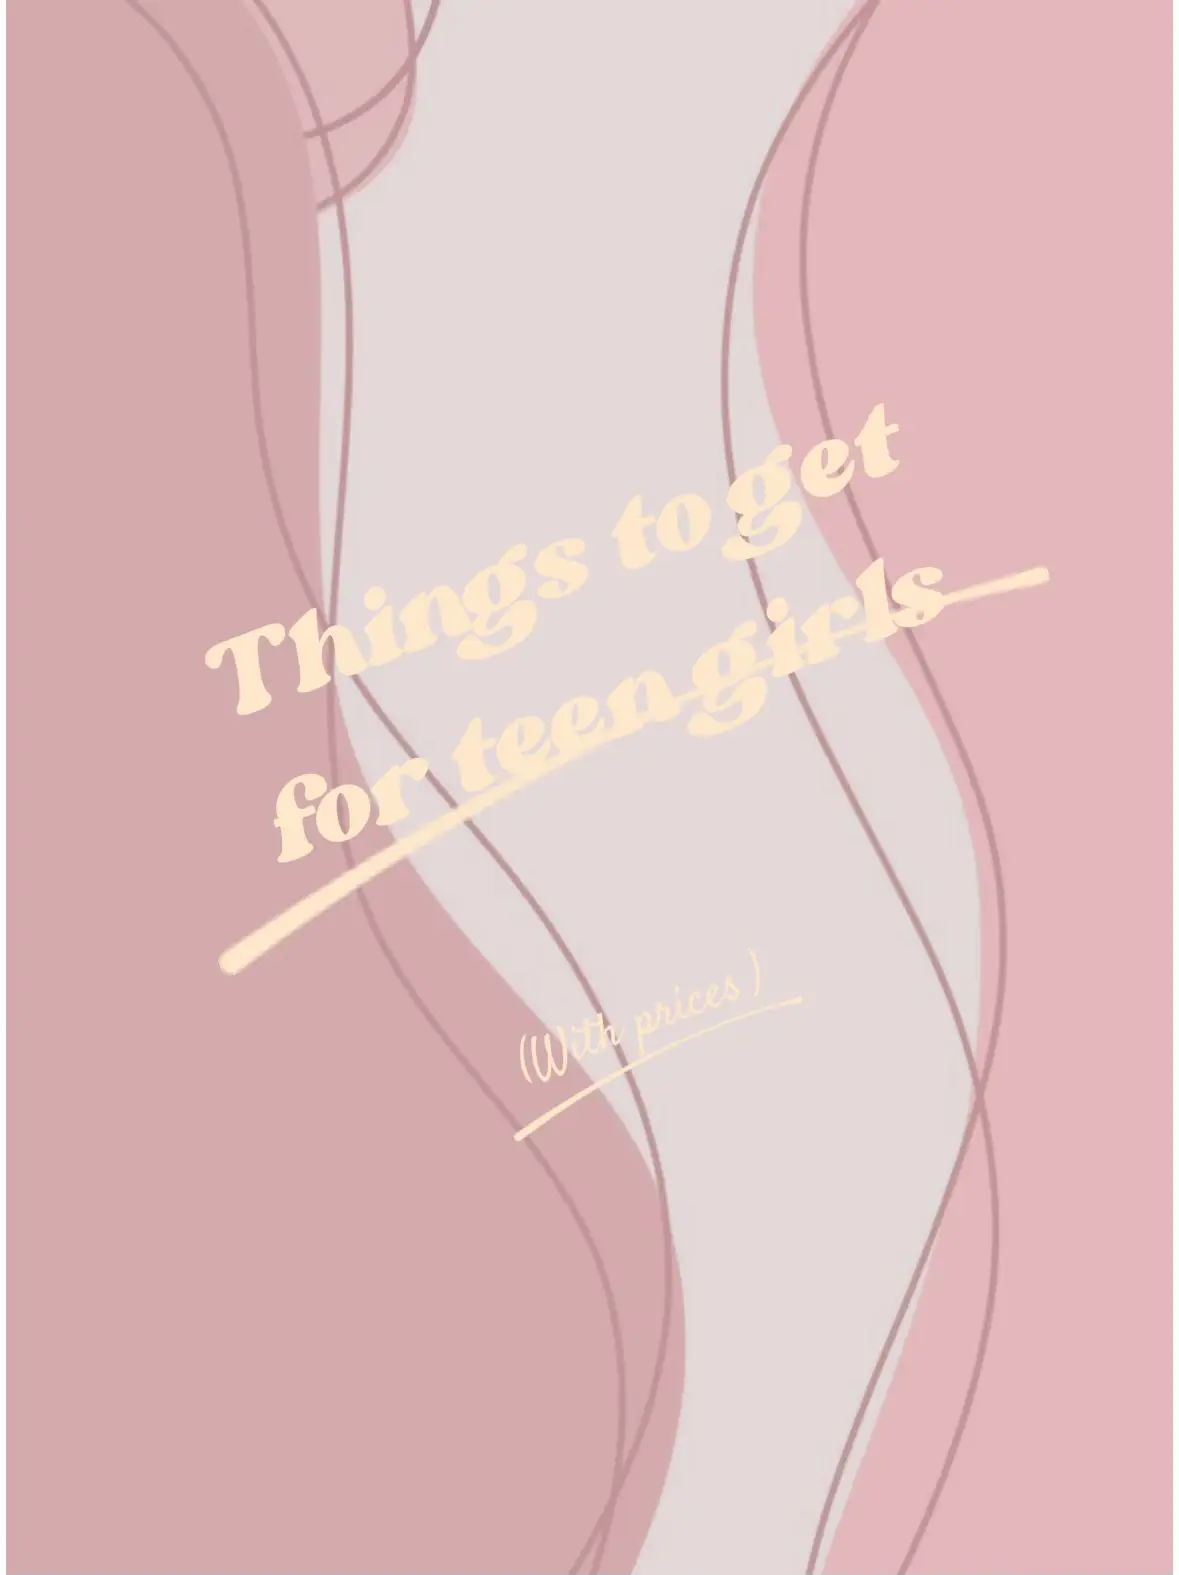 Pin by Absf on f  Girly captions, Pink panties, The girlfriends